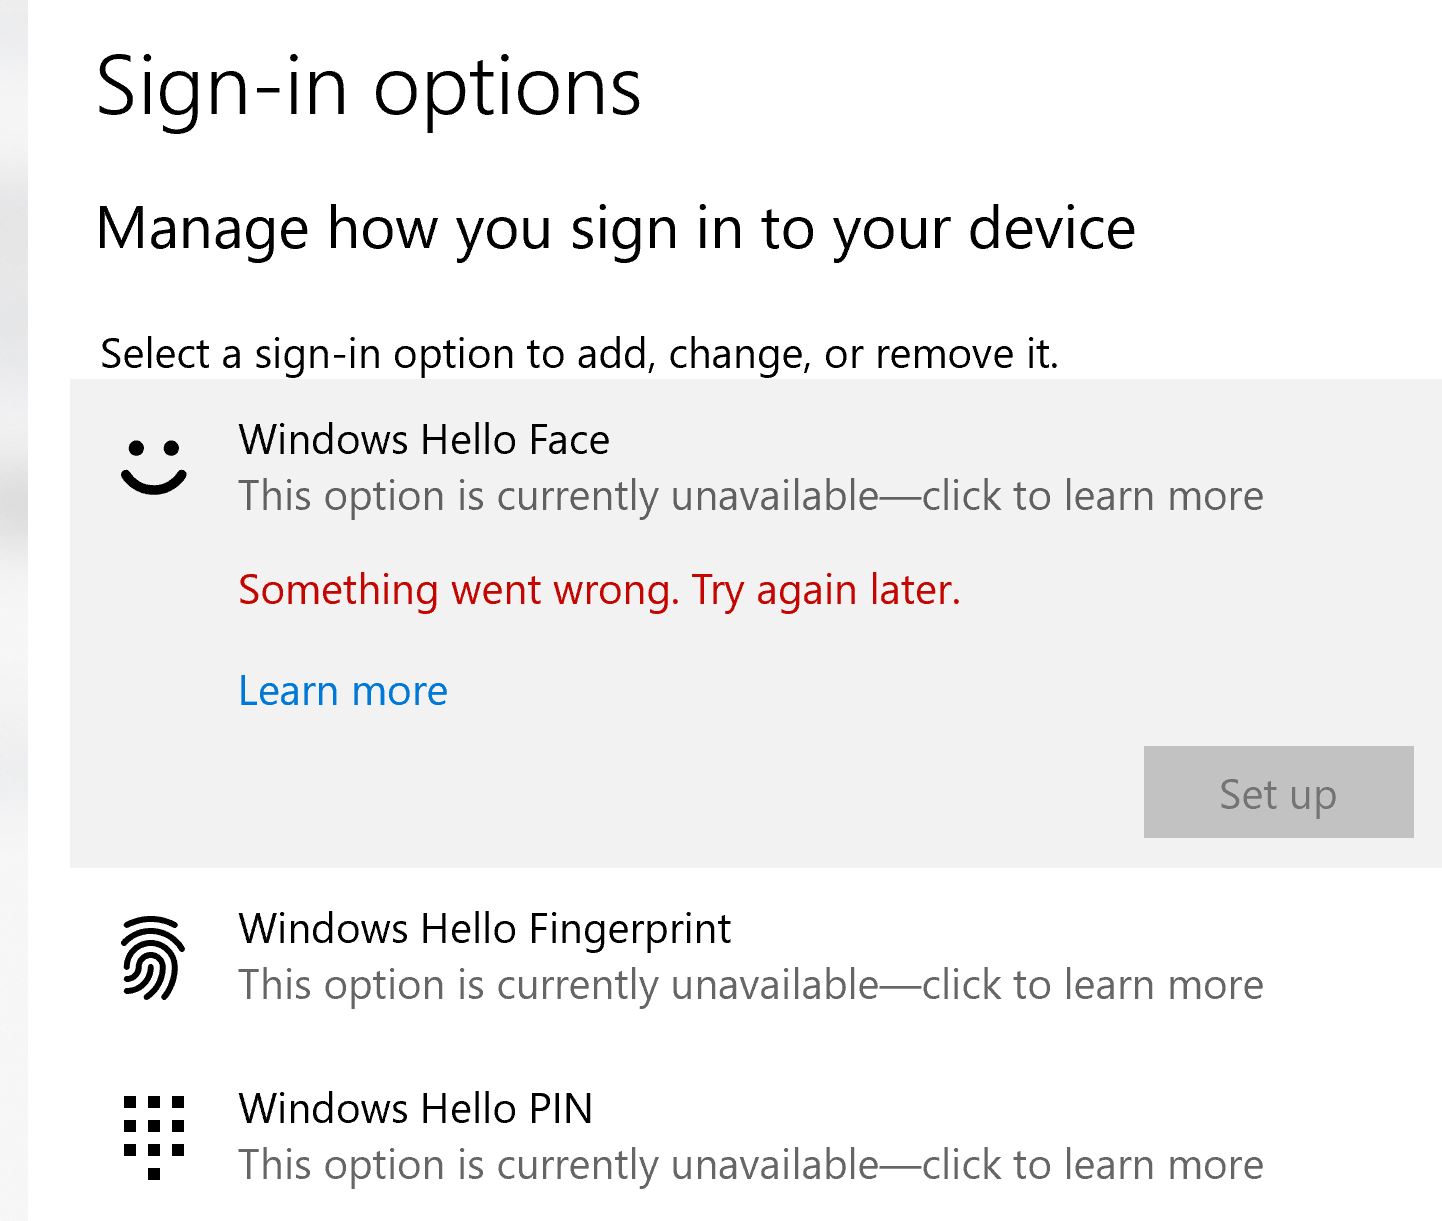 Windows Hello "This option is currently unavailable-click to learn more" problem 78aafd98-9afe-4acf-9a8d-4546be3e1a8f?upload=true.jpg